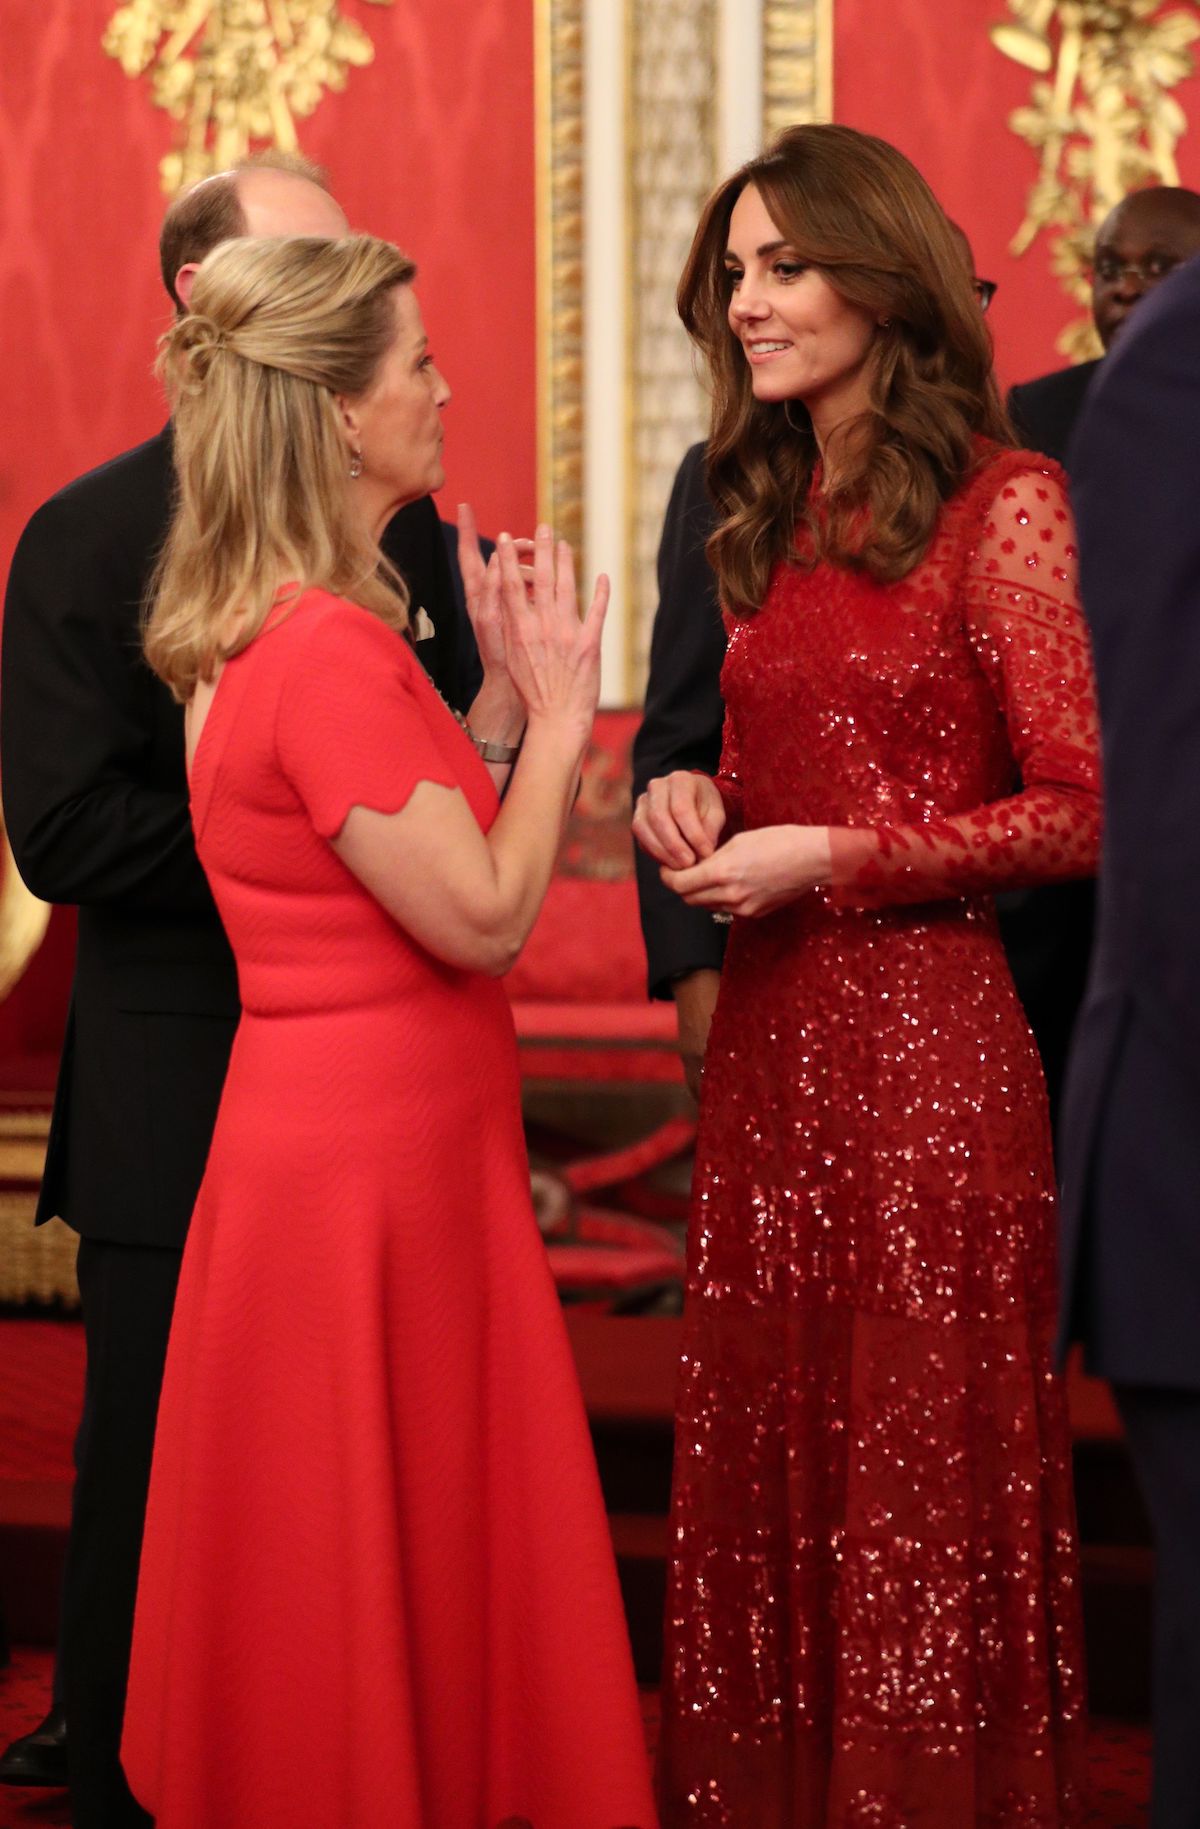 Kate Middleton Wows In Gorgeous Sparkling Red Dress At Royal Reception